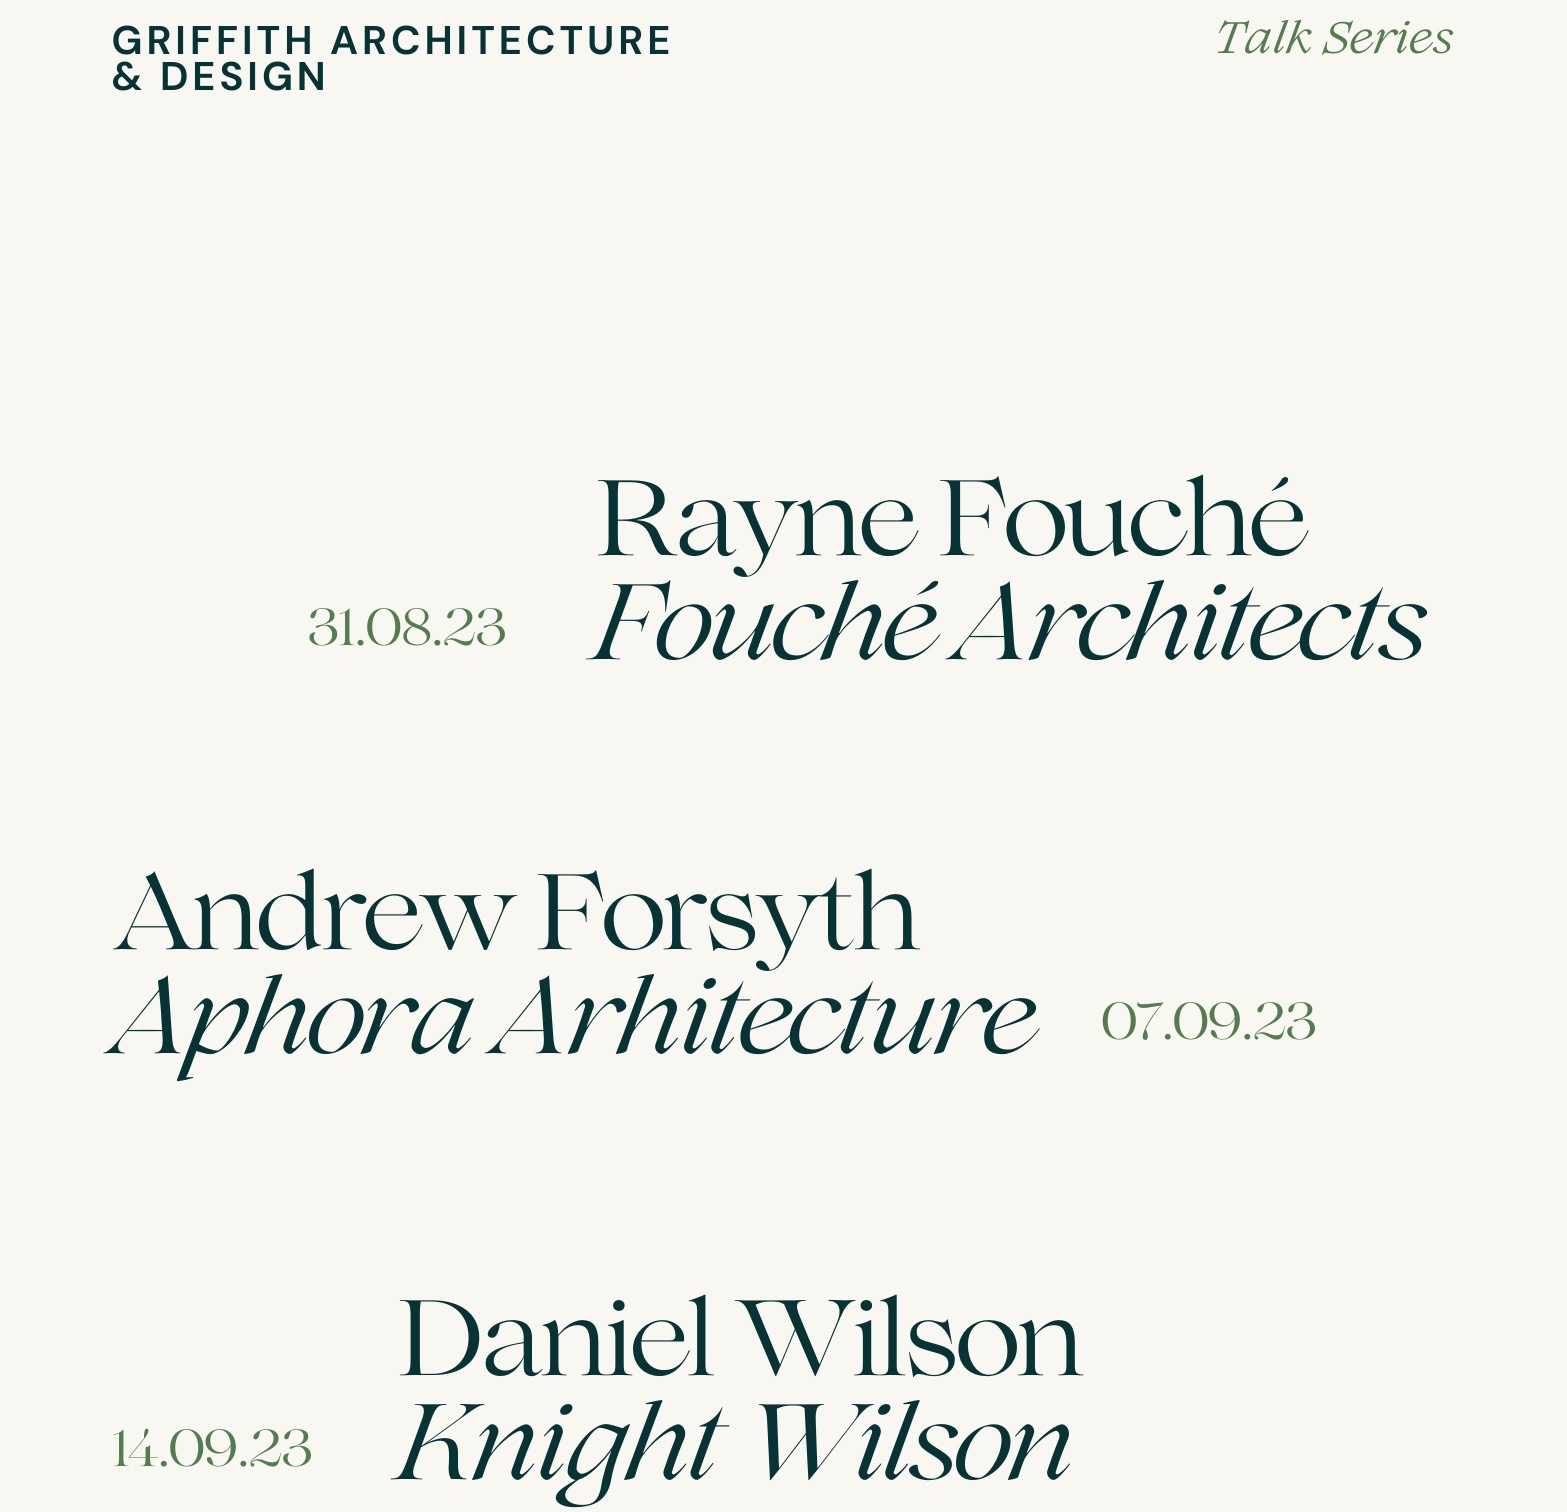 Griffith Architecture 'Dialogues' Talk Series